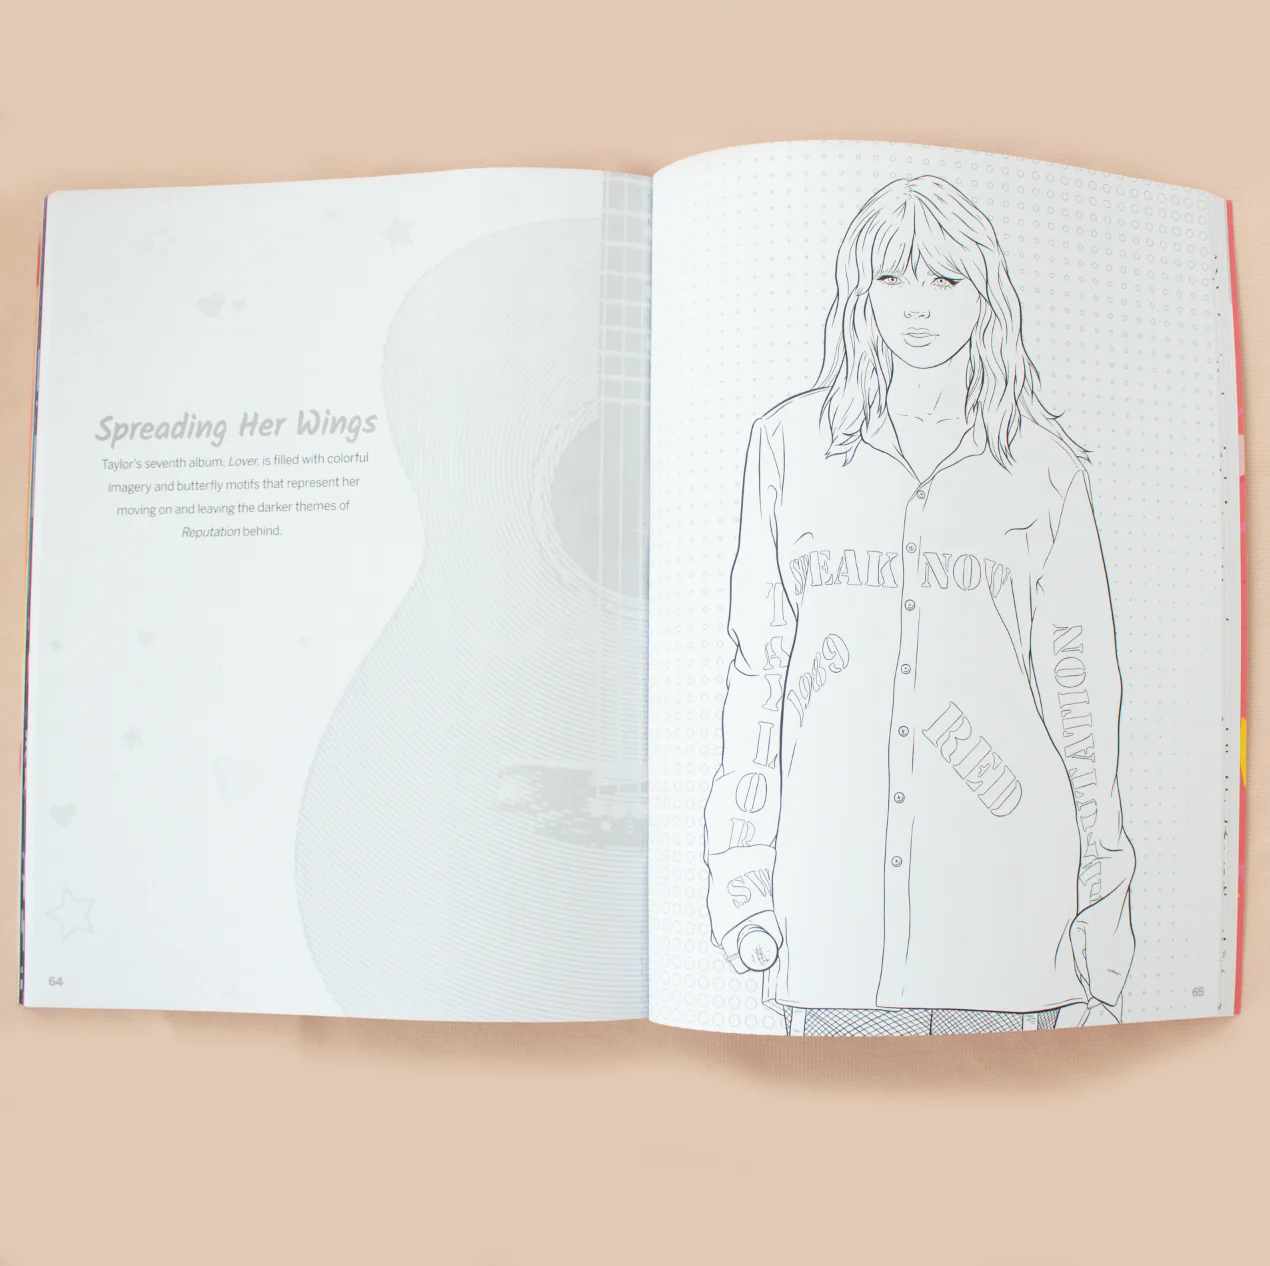 Taylor Swift Coloring + Activity Book